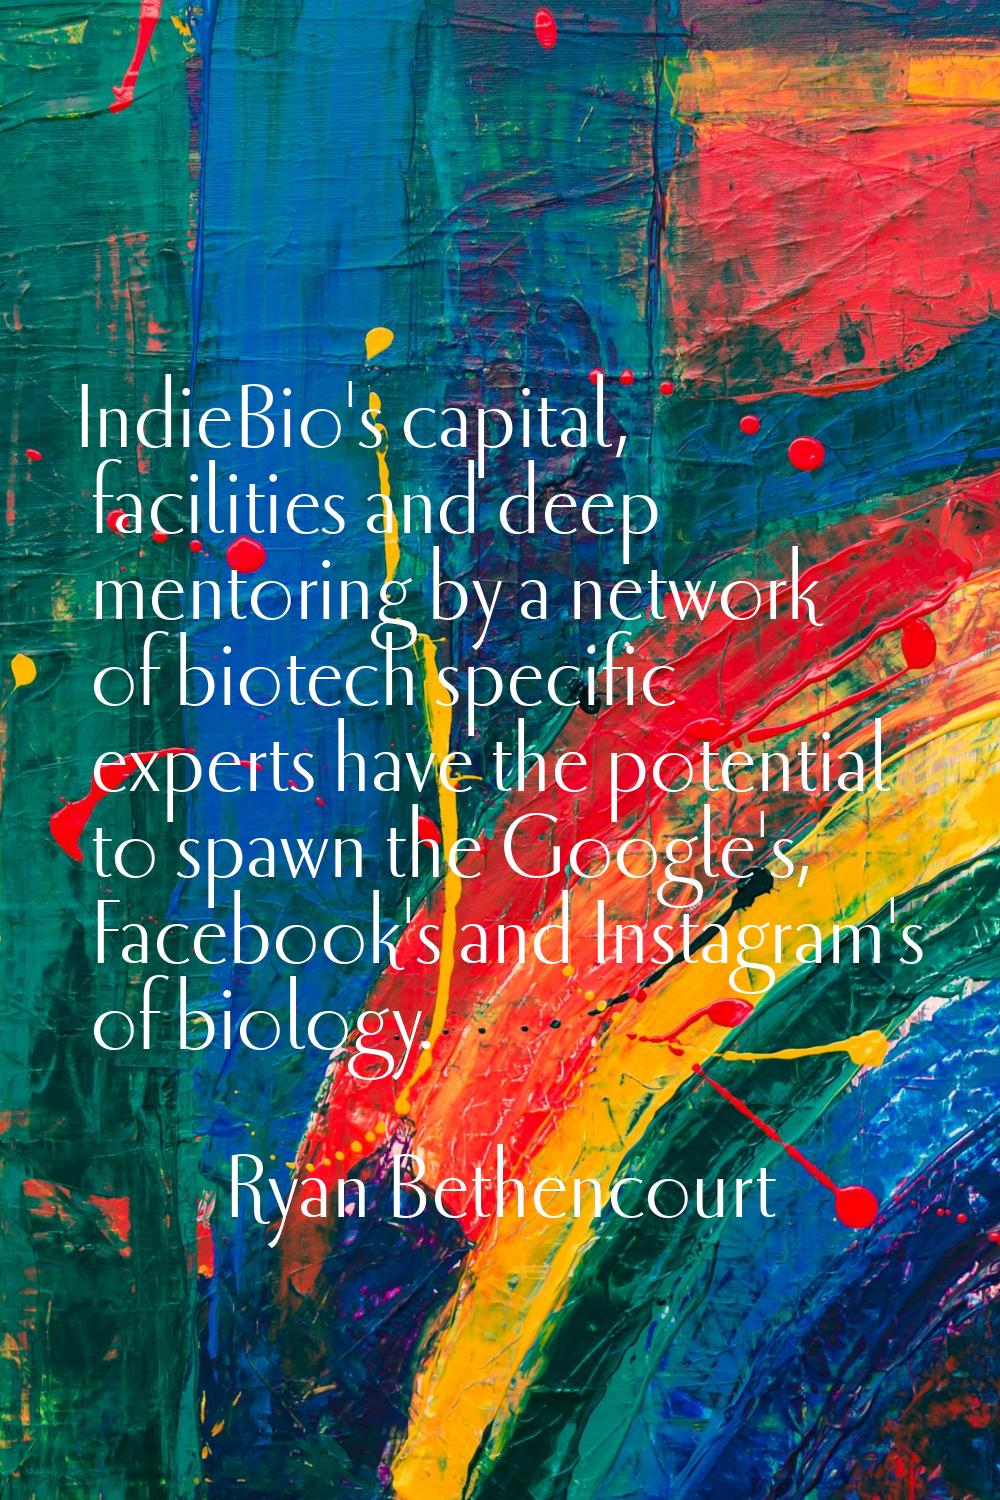 IndieBio's capital, facilities and deep mentoring by a network of biotech specific experts have the